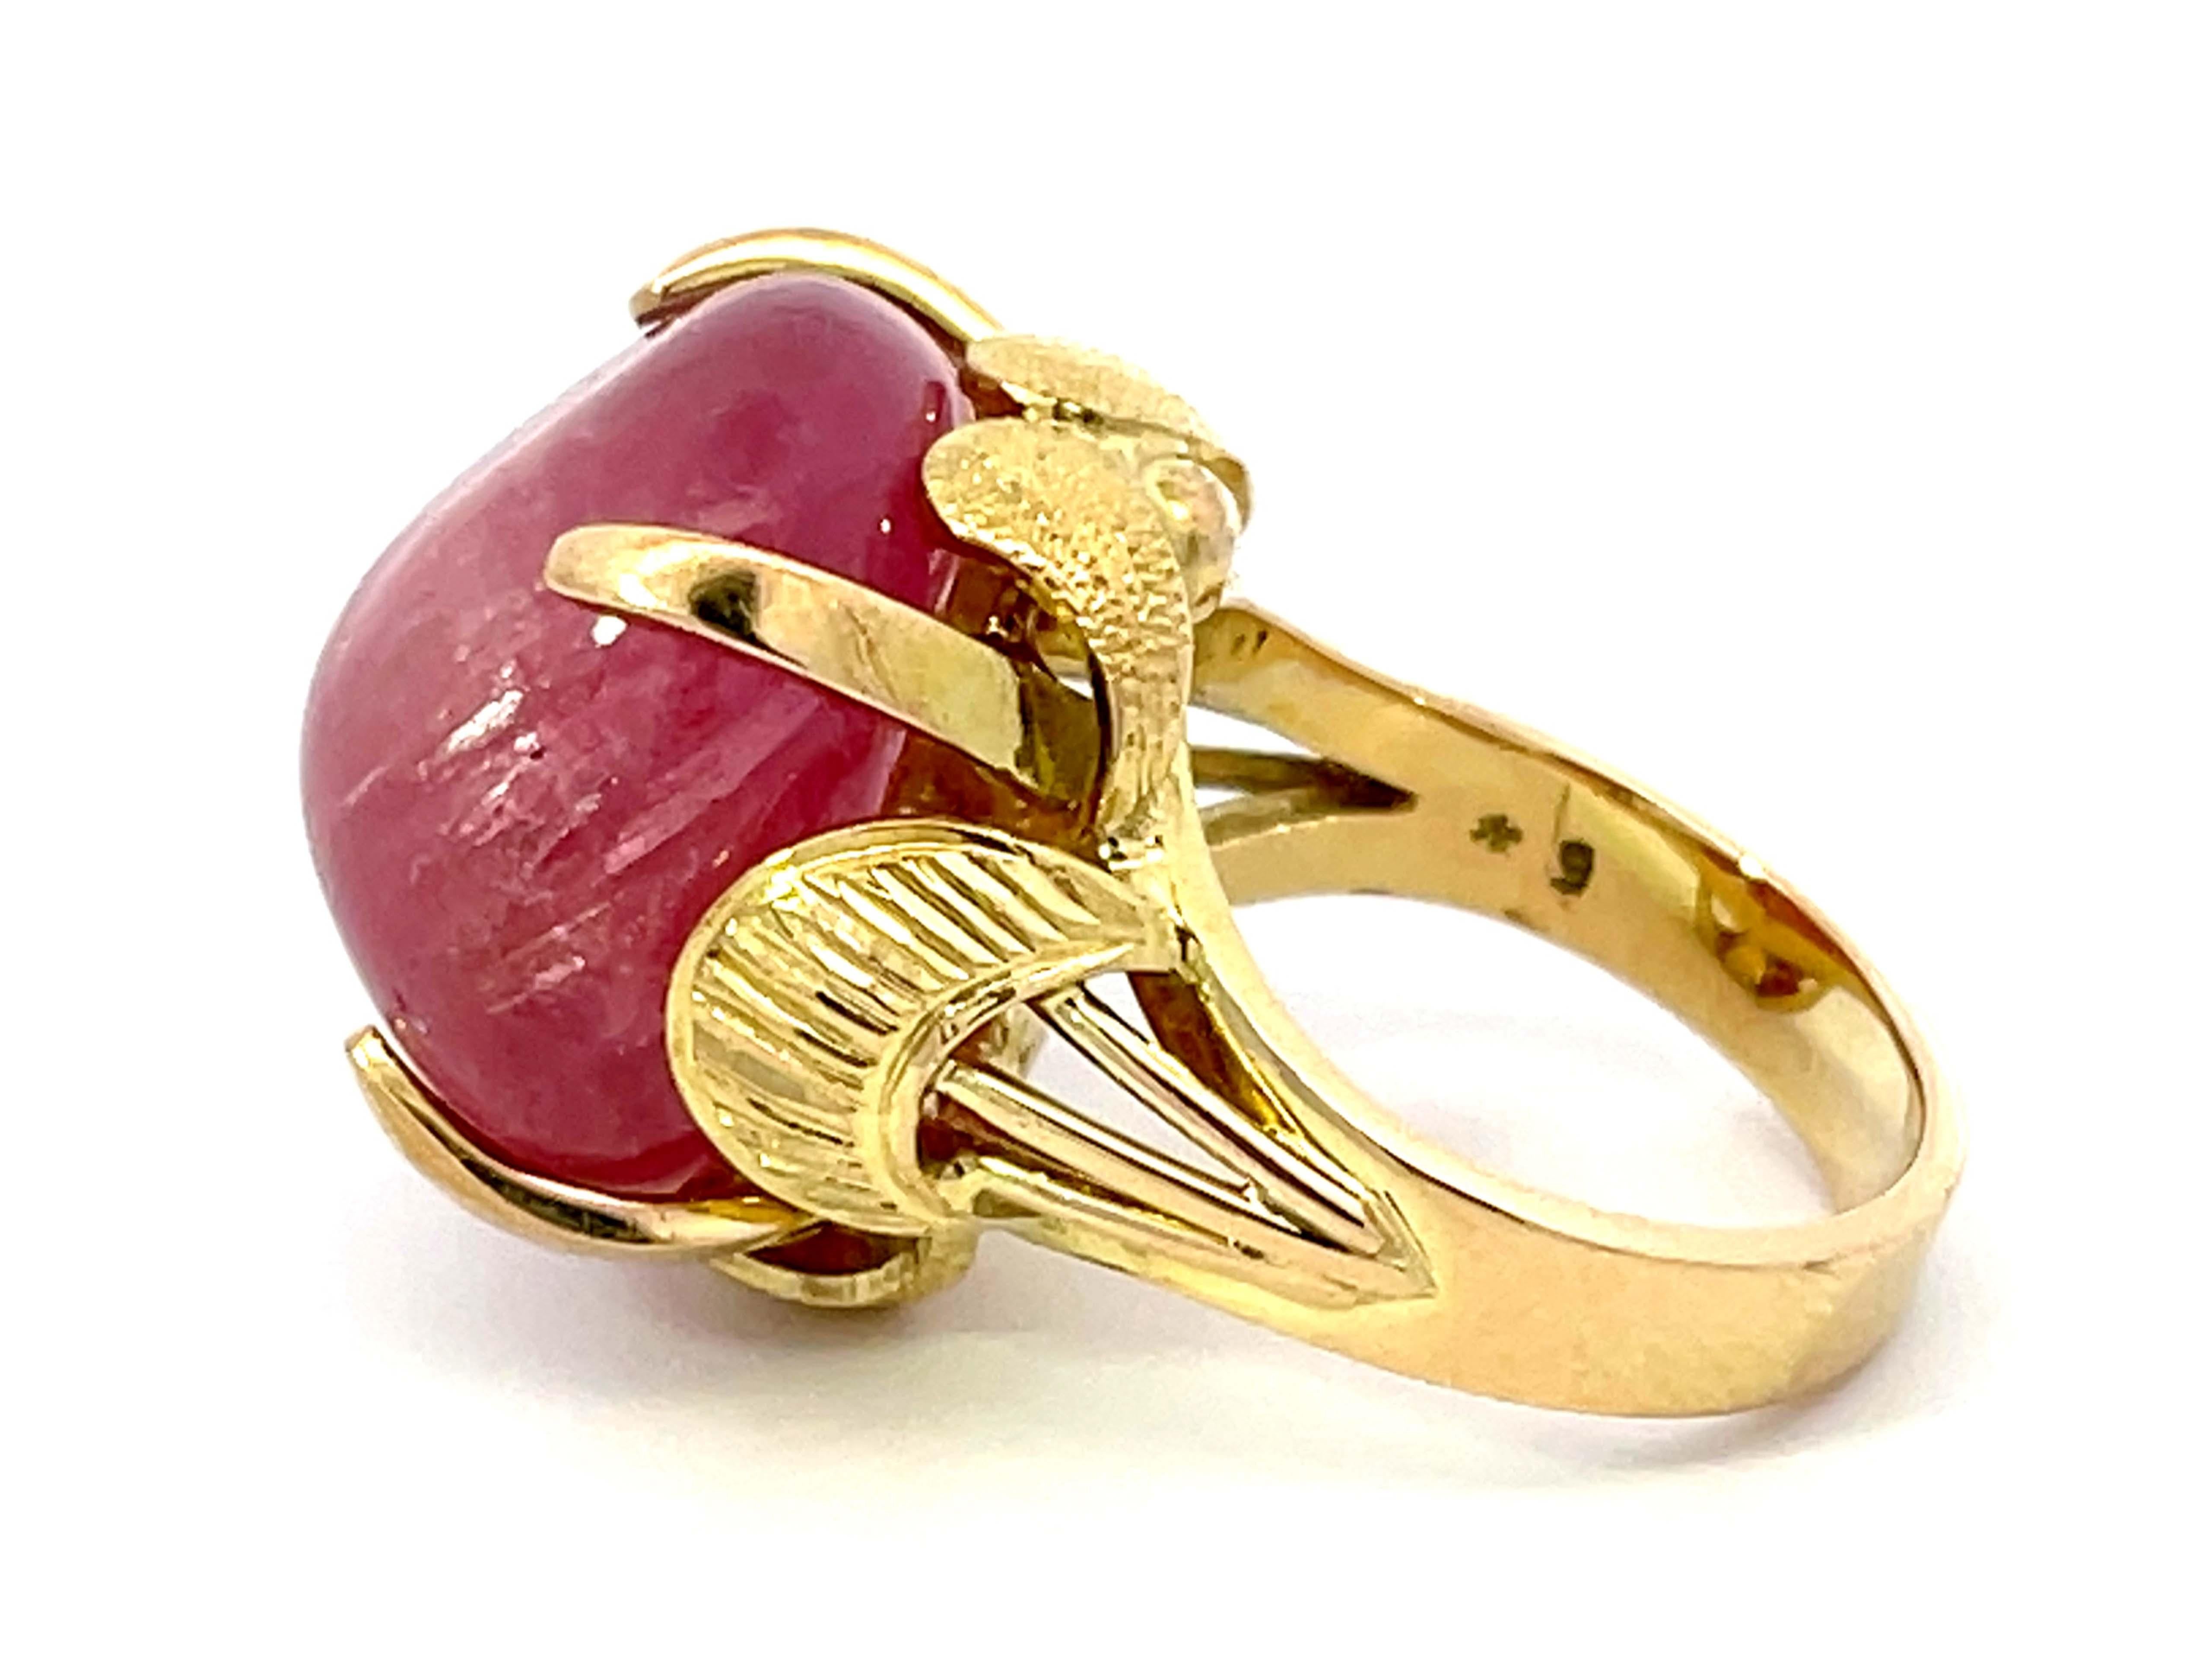 Women's Large Pink Tourmaline Ring 14k Yellow Gold For Sale